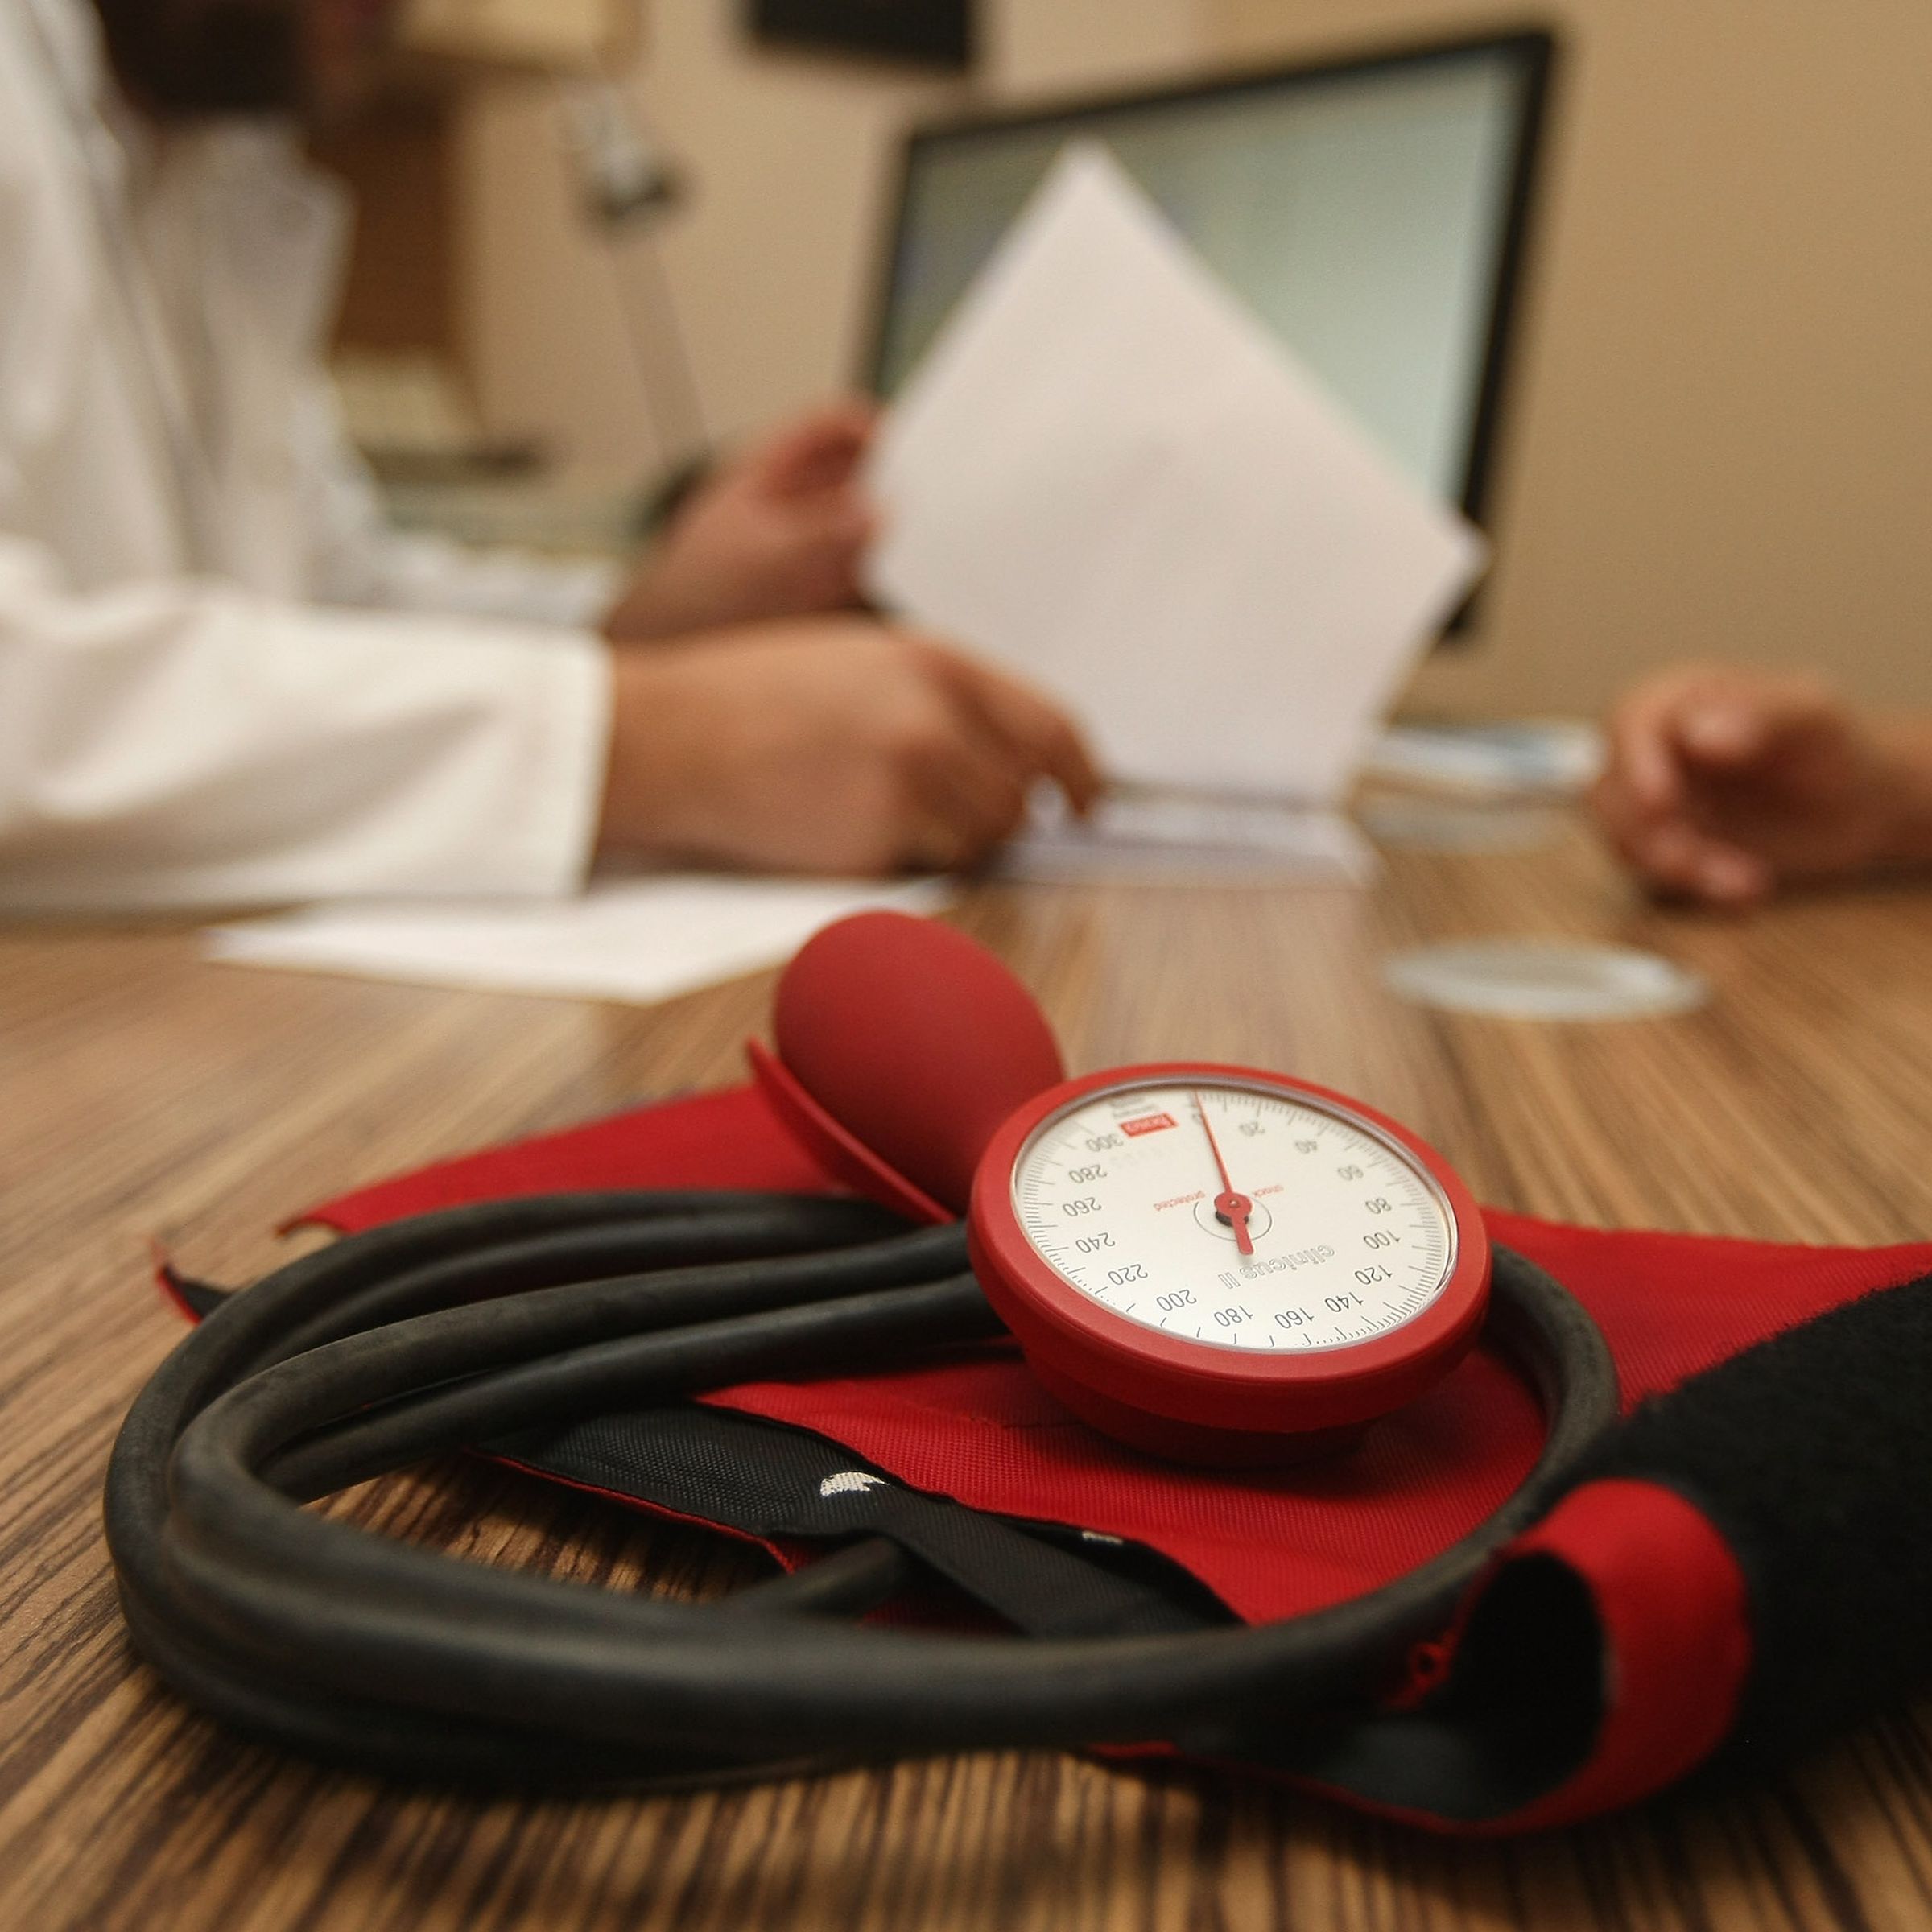 A red blood pressure meter sits on a wooden desk, in the background, a doctor looks over papers. A patient’s arm is also visible on the desk. 